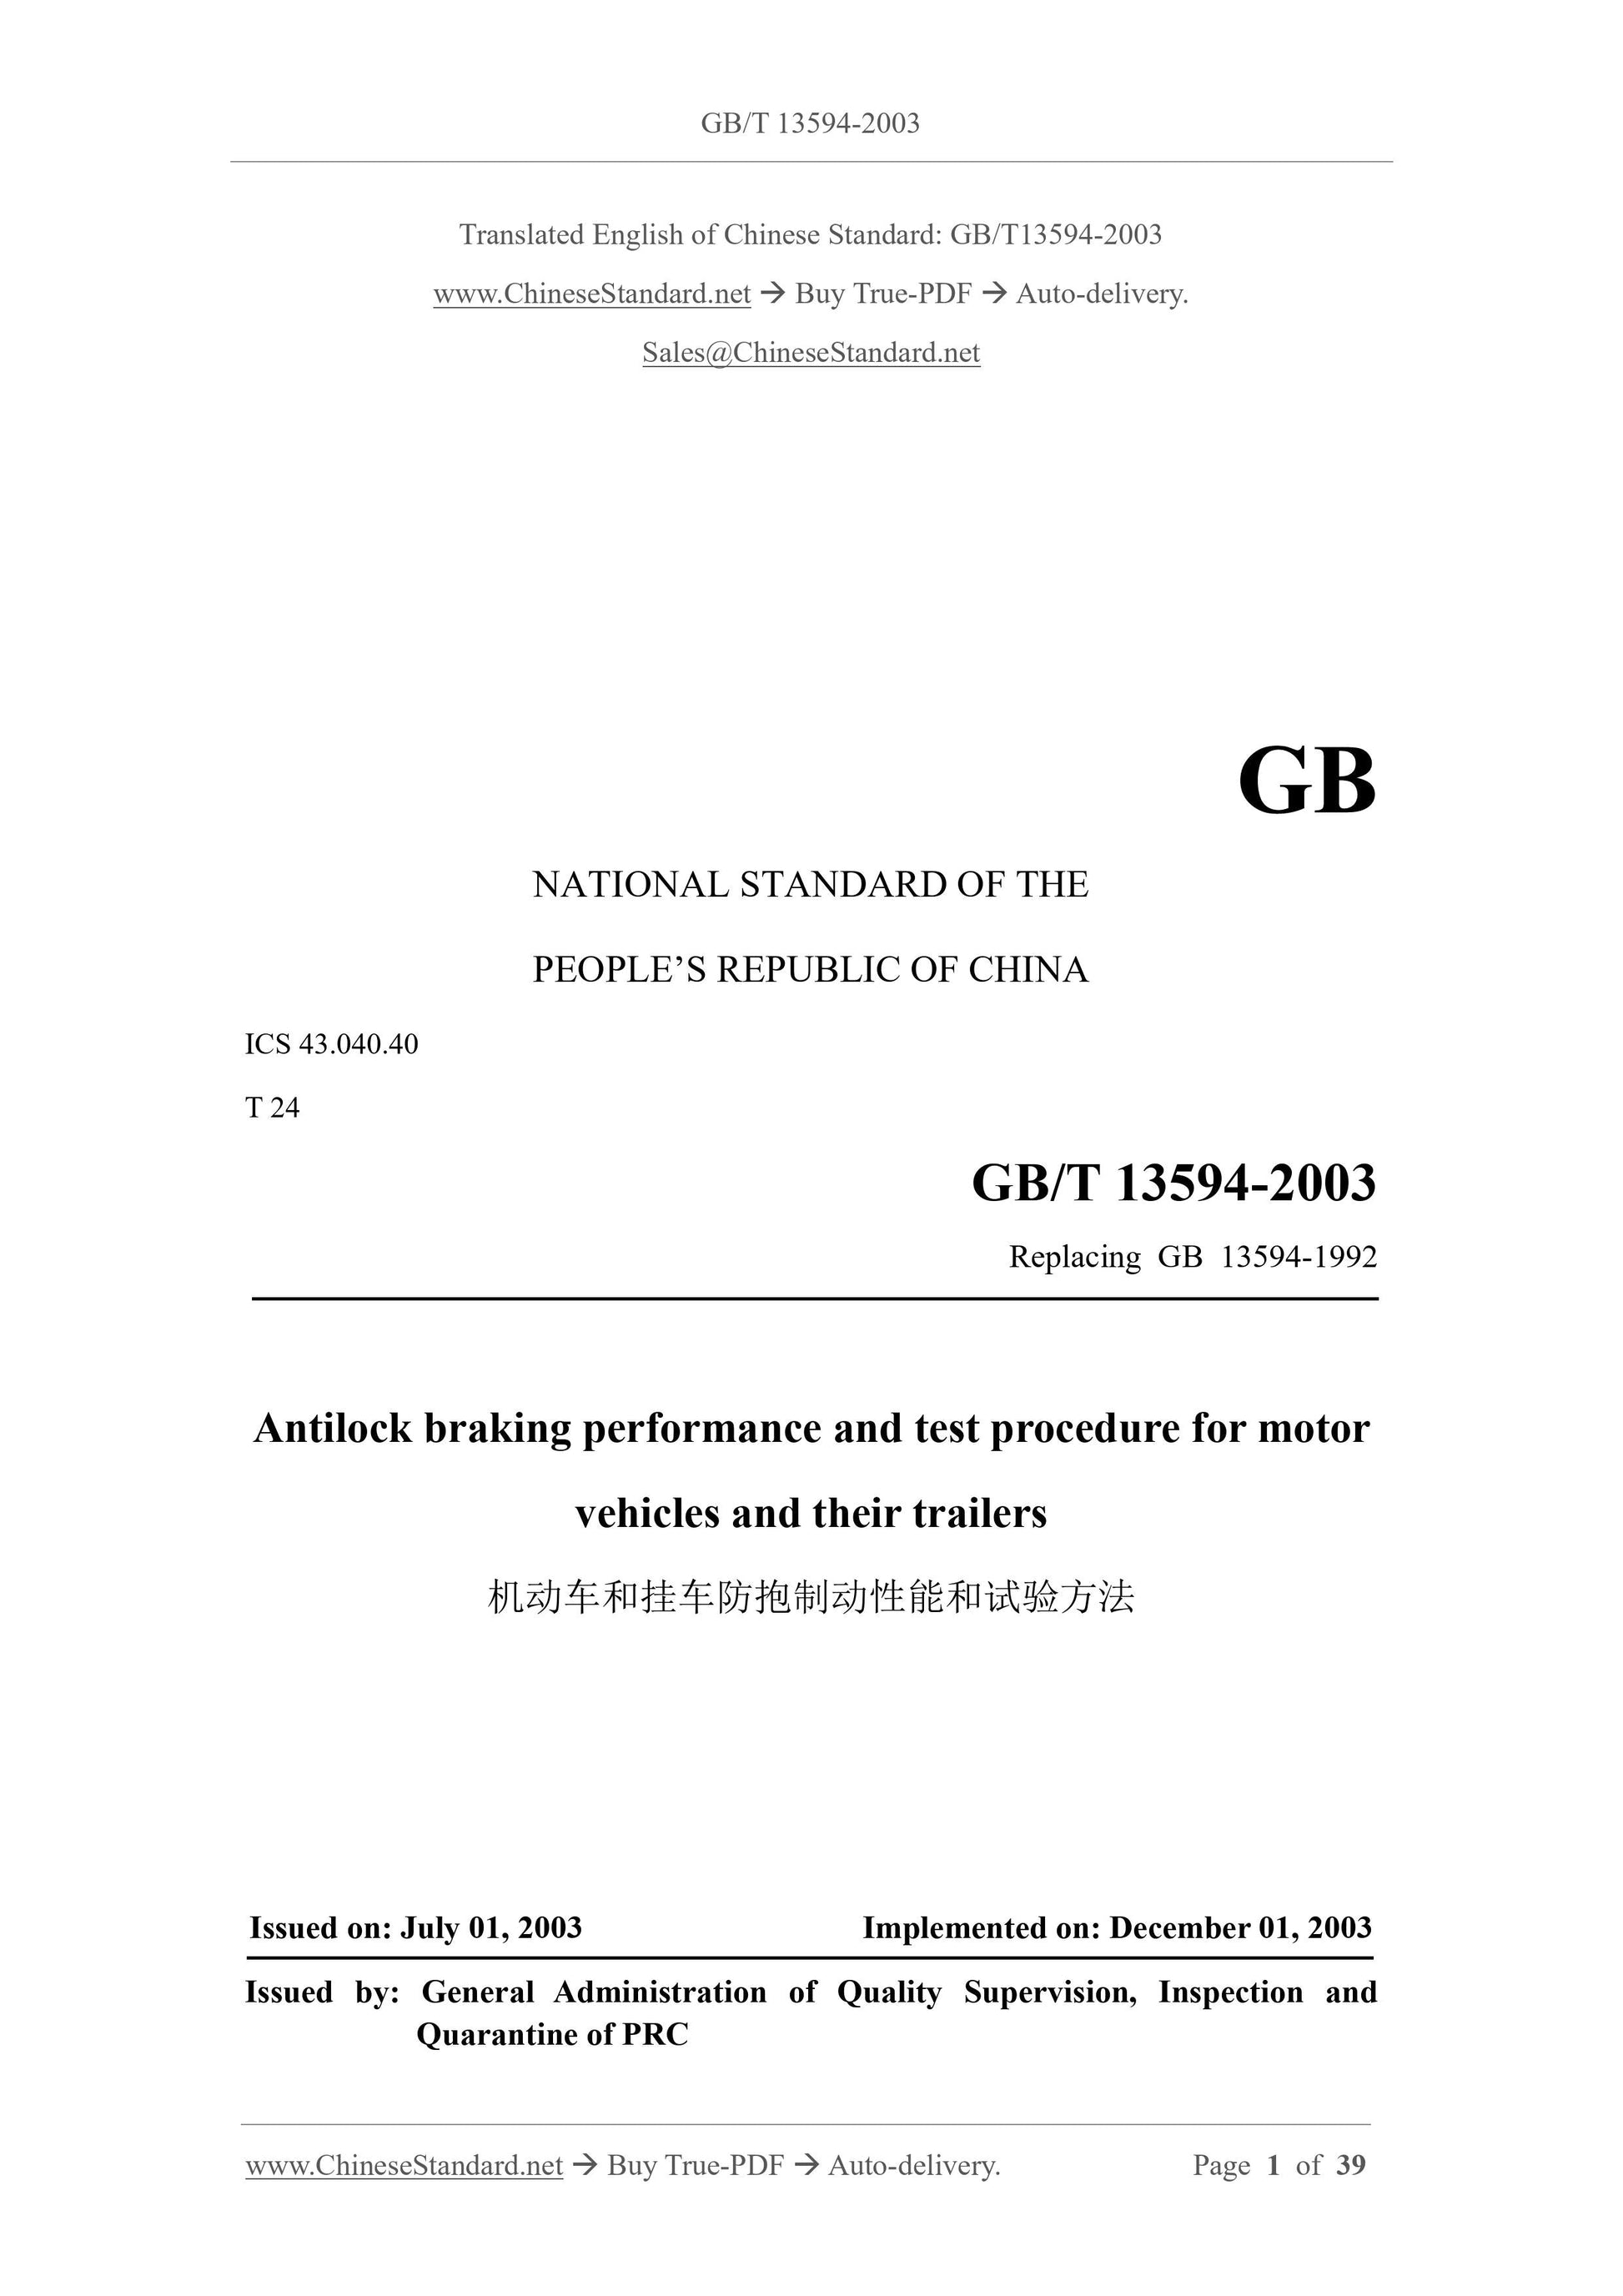 GB/T 13594-2003 Page 1